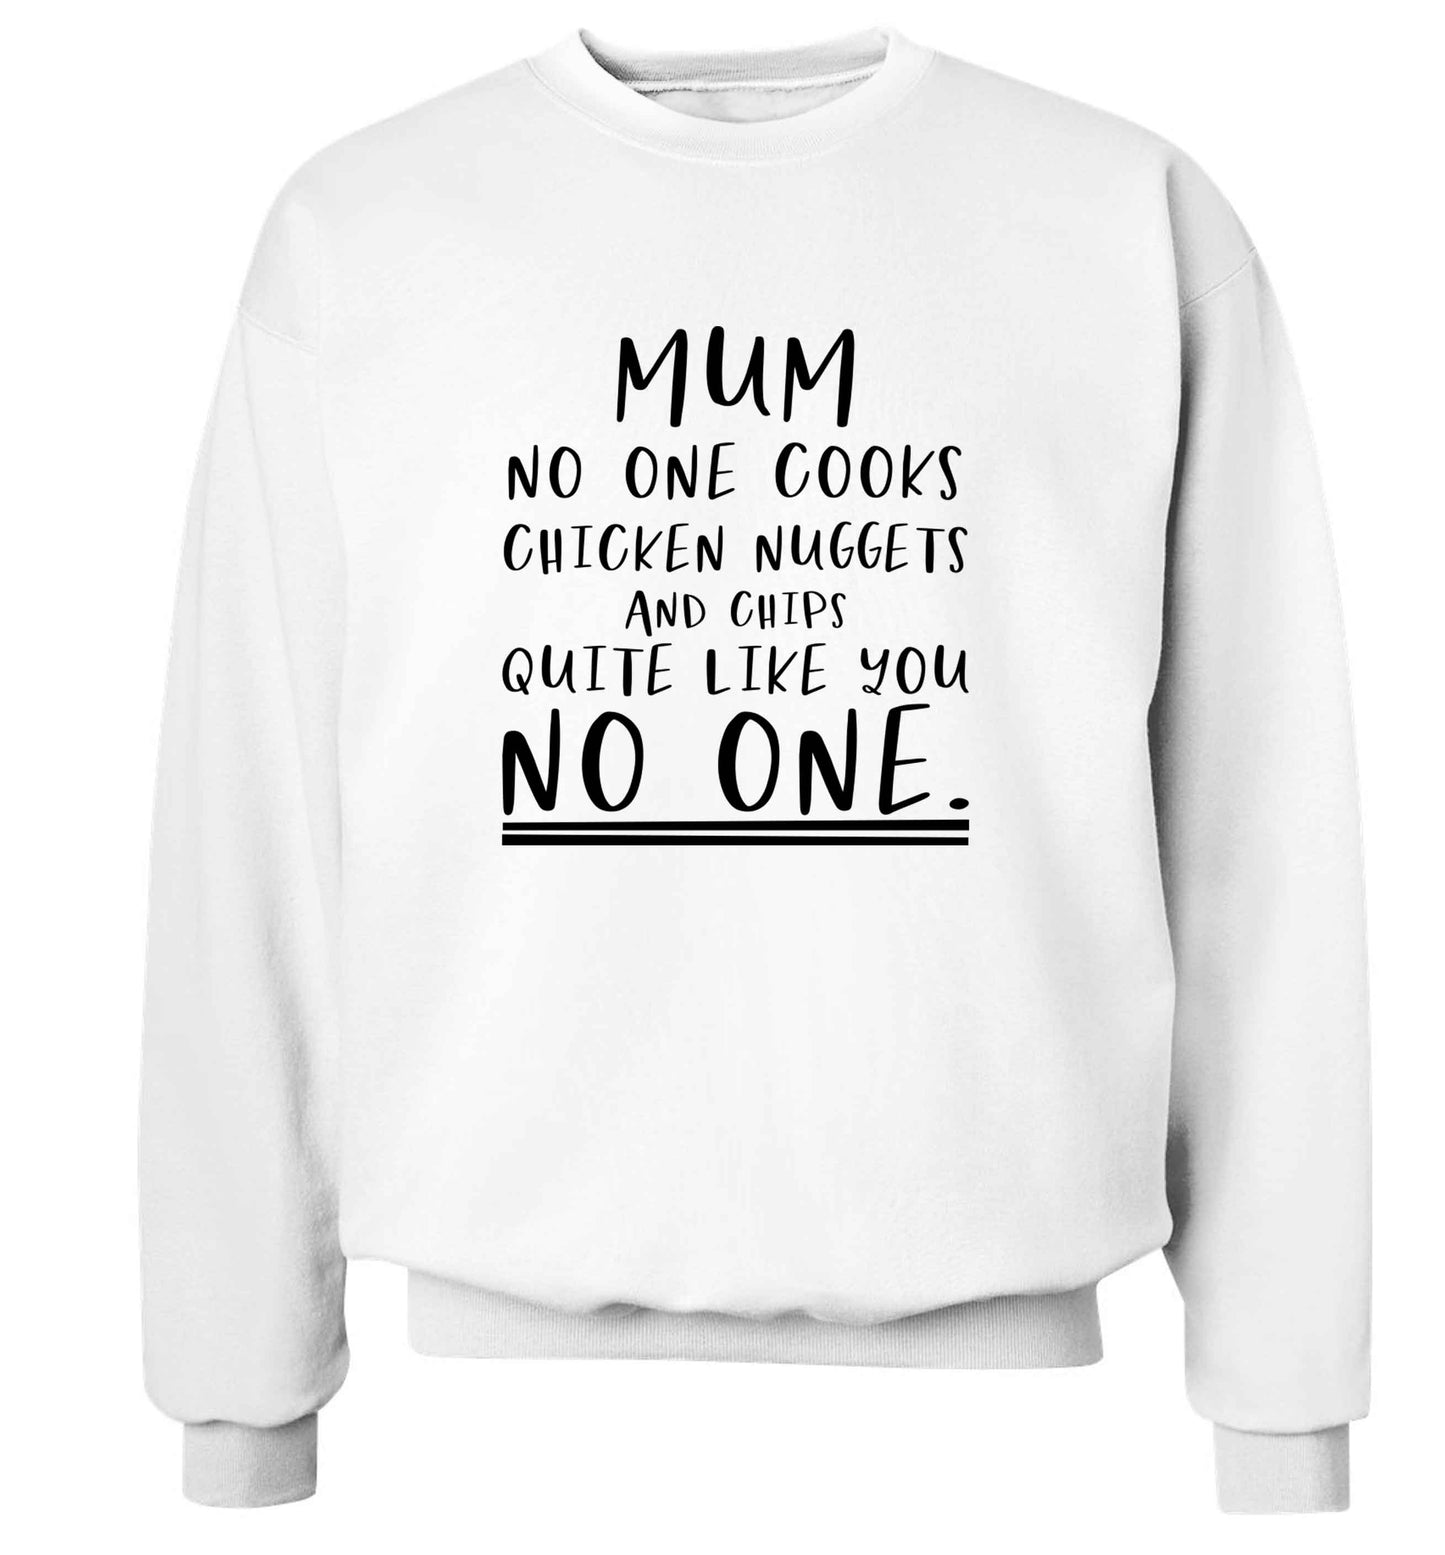 Super funny sassy gift for mother's day or birthday!  Mum no one cooks chicken nuggets and chips like you no one adult's unisex white sweater 2XL